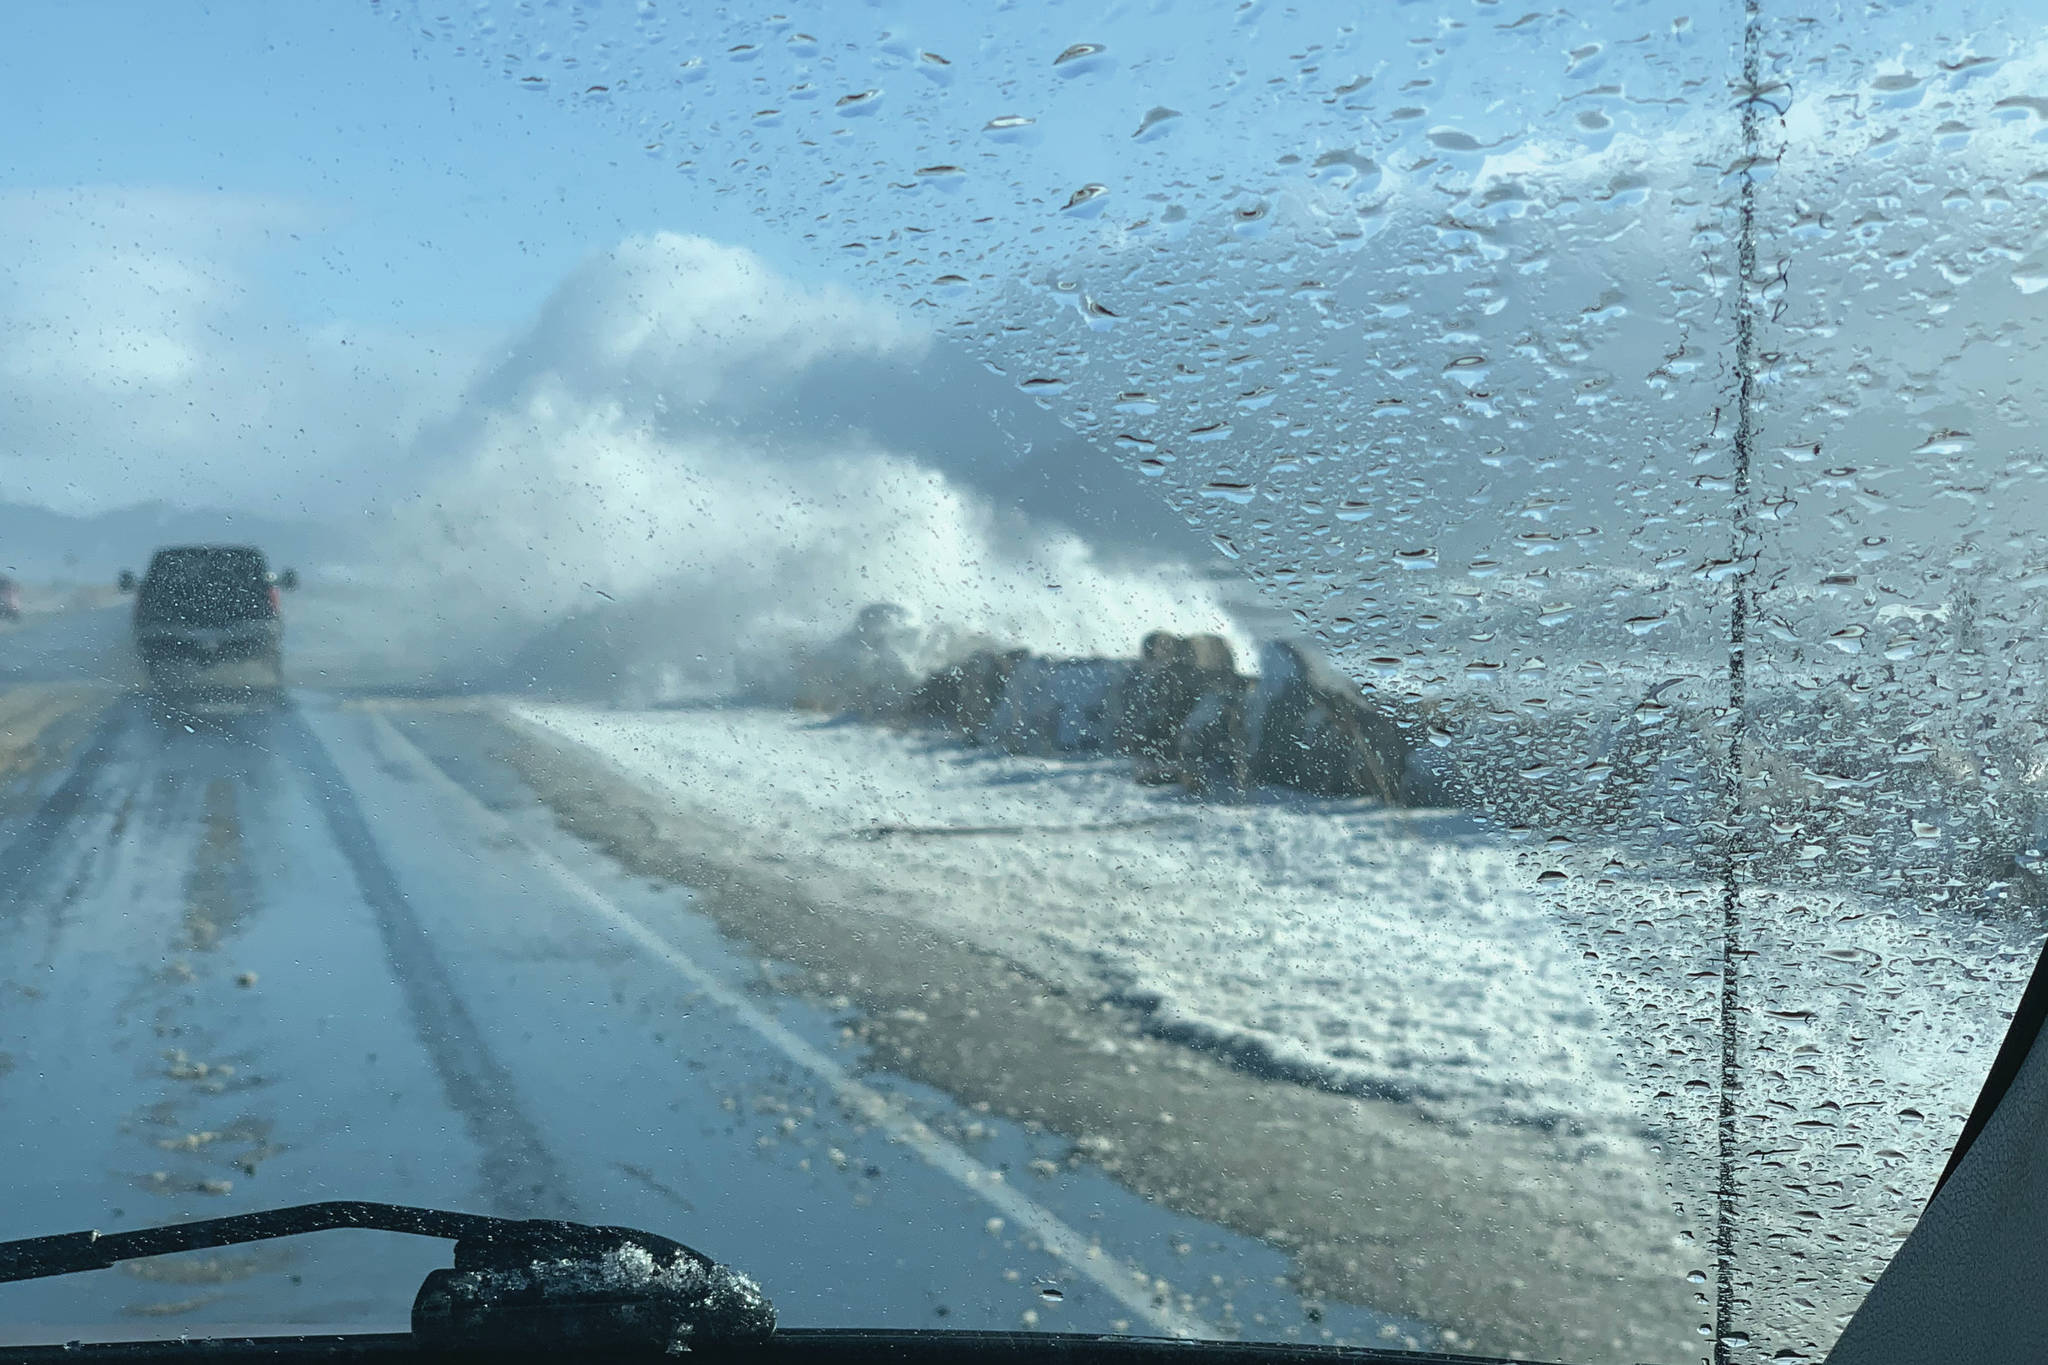 Waves during an extreme high tide and big seas pound the Homer Spit on Sunday afternoon, Feb. 28, 2021, on the Homer Spit, as seen through photographer Malia Anderson's windshield. (Photo by Malia Anderson / Homer News)